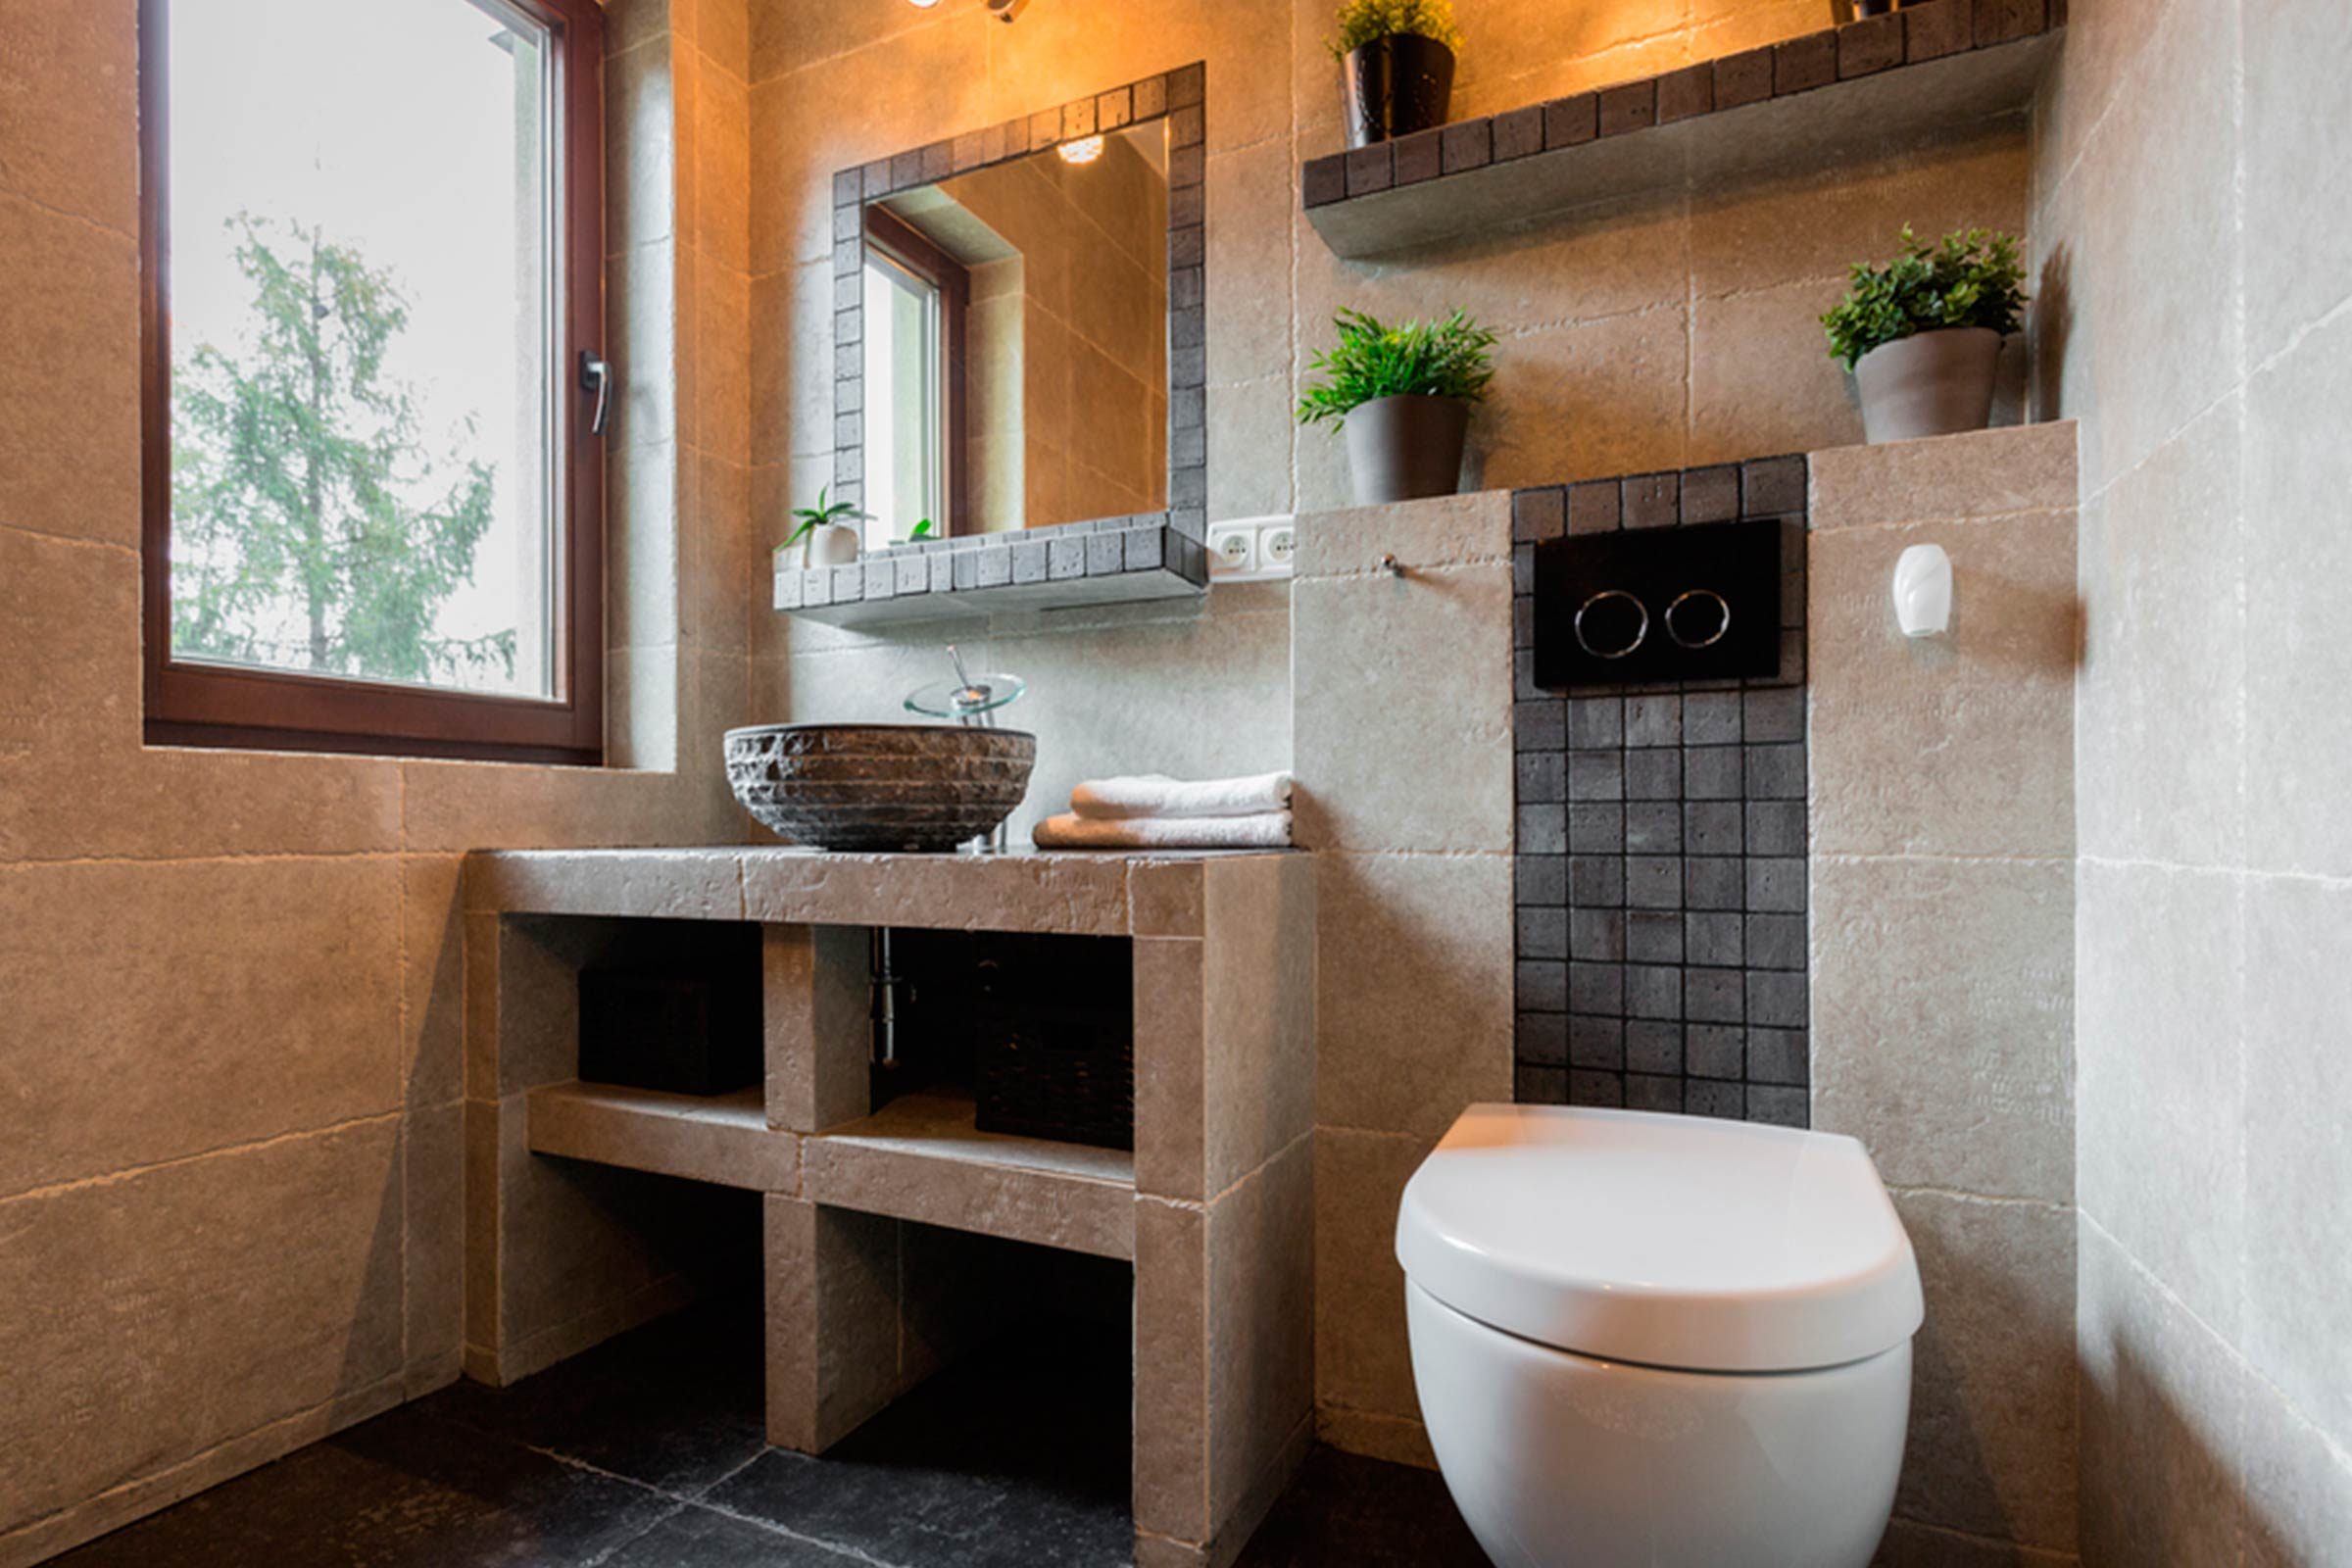 30 Styling and Design Tips to Make a Small Bathroom Look Bigger